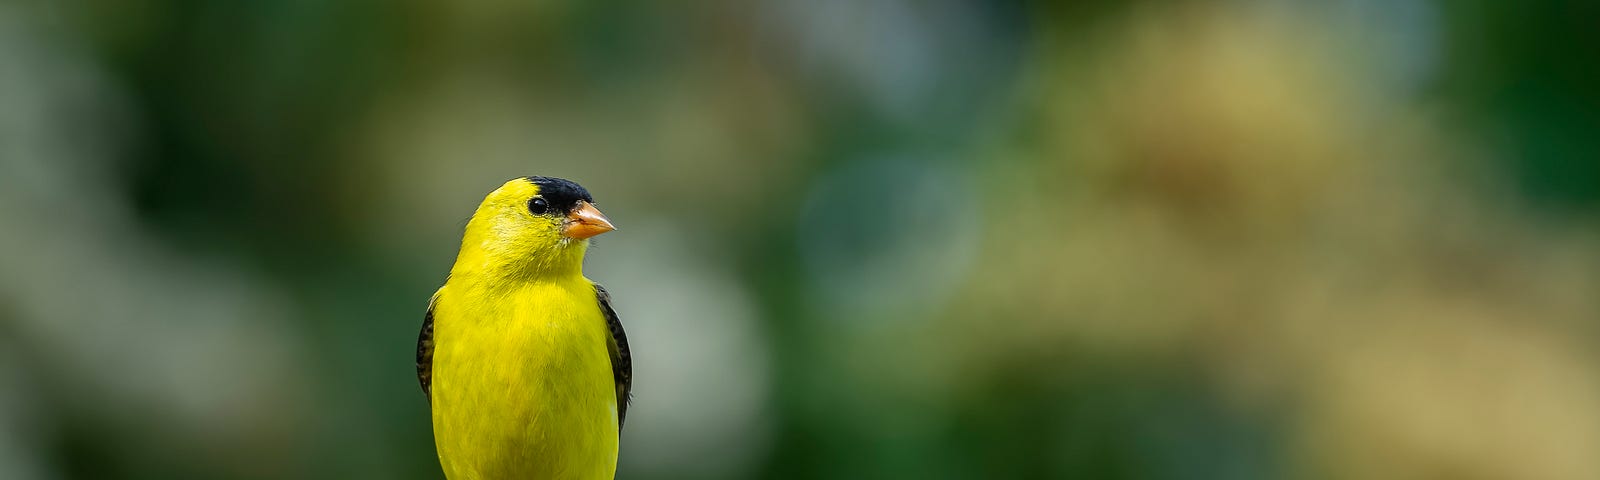 Photo of an American goldfinch in a garden.